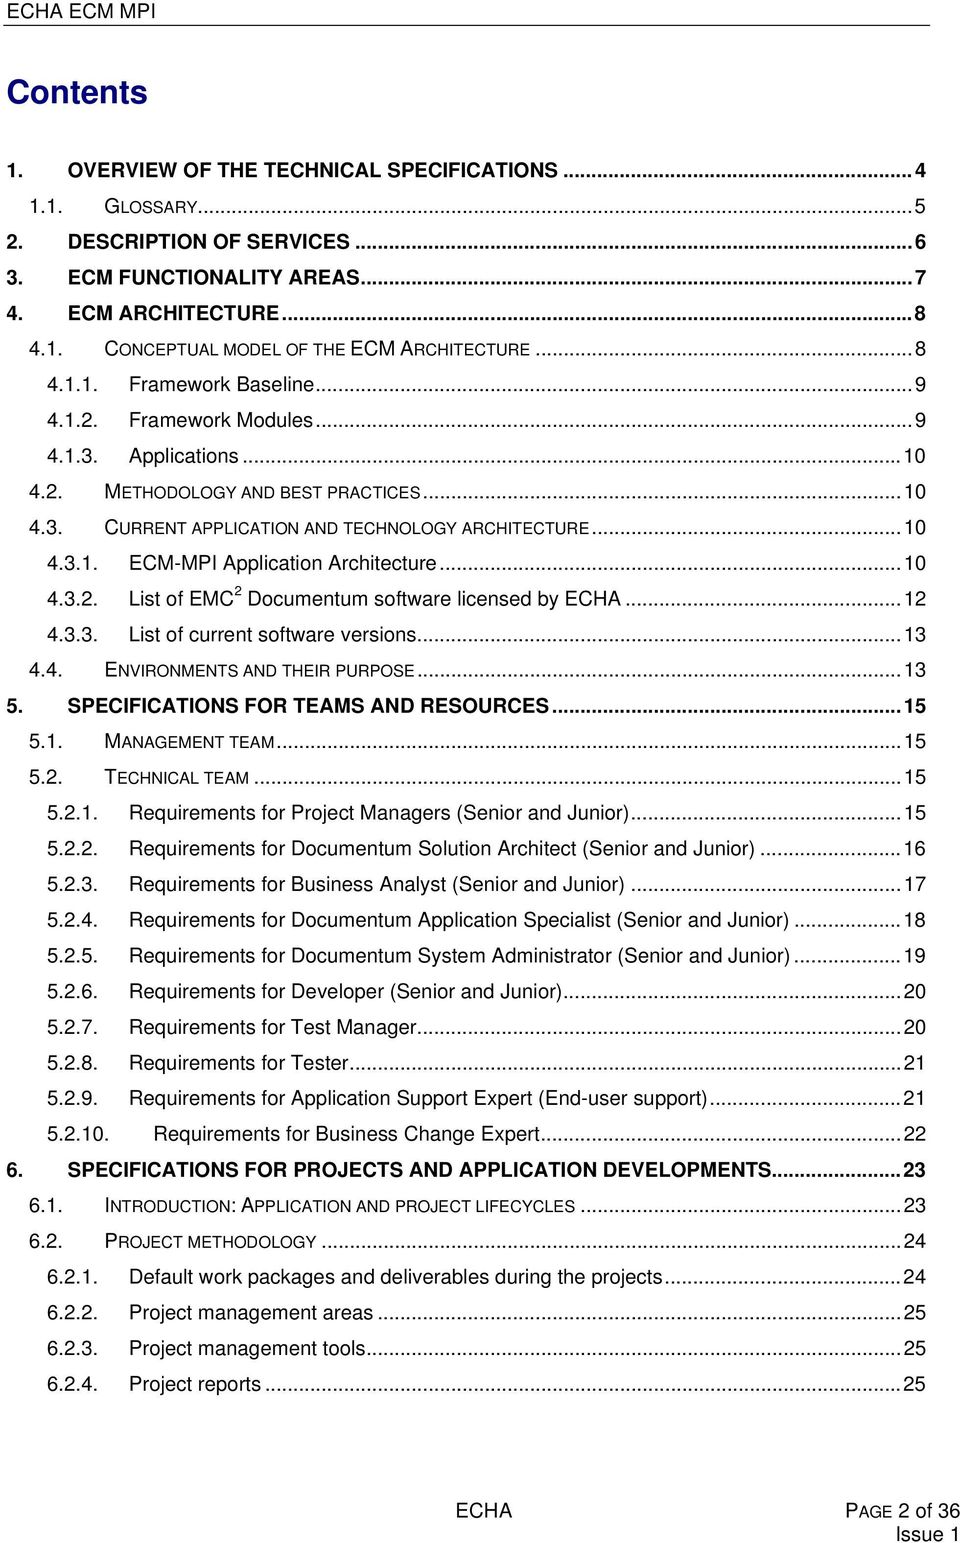 ..10 4.3.2. List of EMC 2 Documentum software licensed by ECHA...12 4.3.3. List of current software versions...13 4.4. ENVIRONMENTS AND THEIR PURPOSE...13 5. SPECIFICATIONS FOR TEAMS AND RESOURCES.